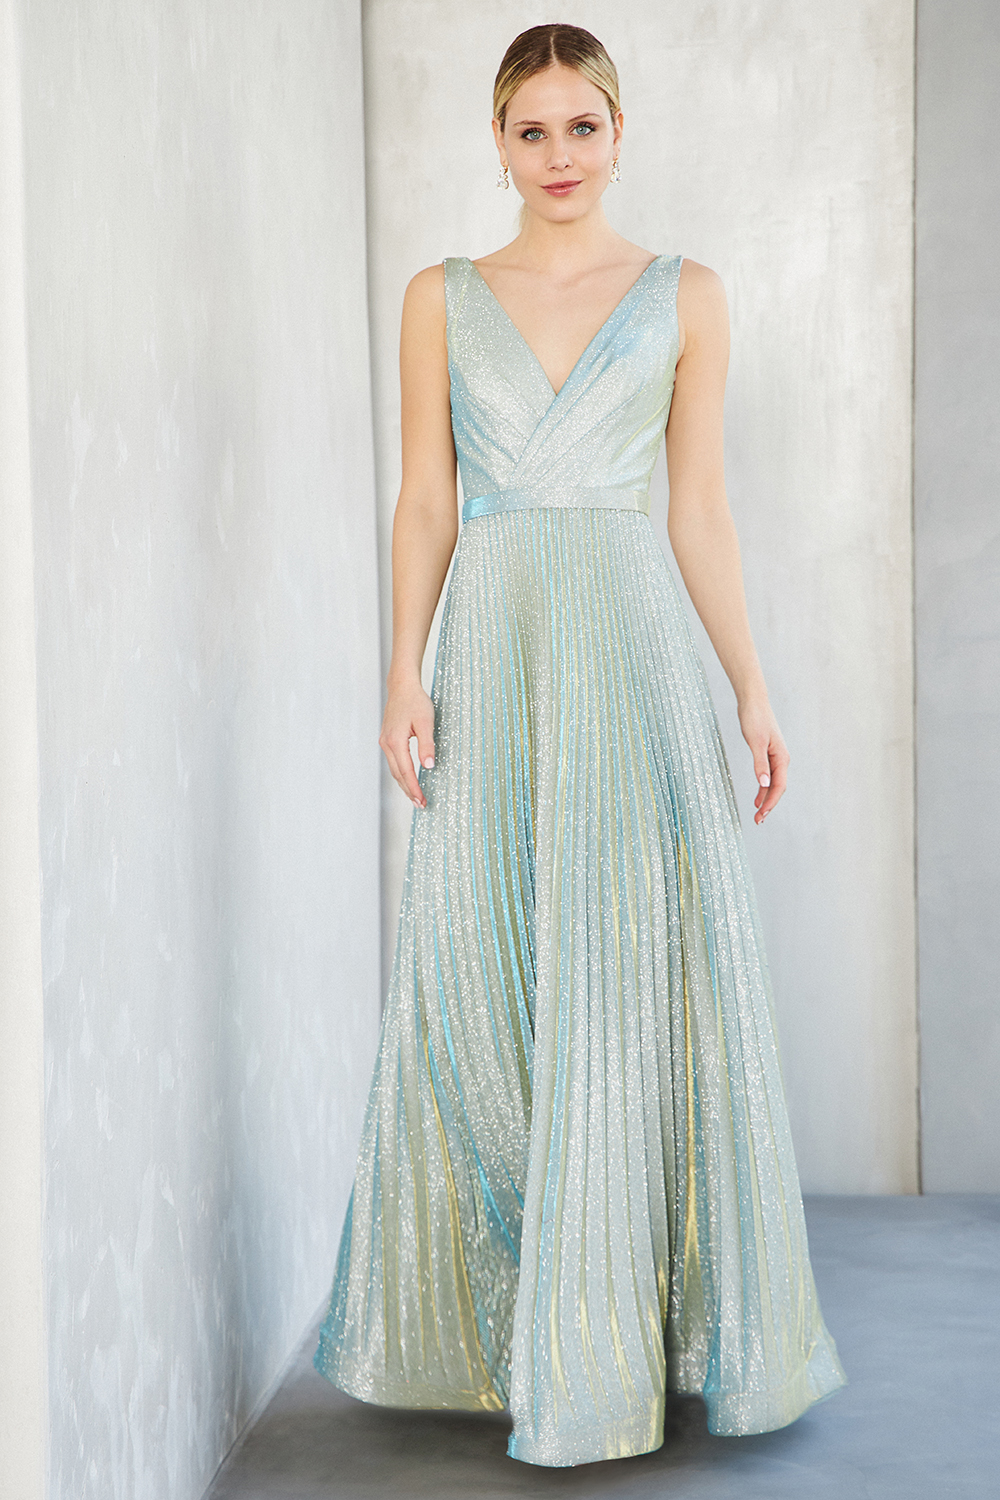 Классические платья / Long cocktail pleated dress with shining fabric and wide straps